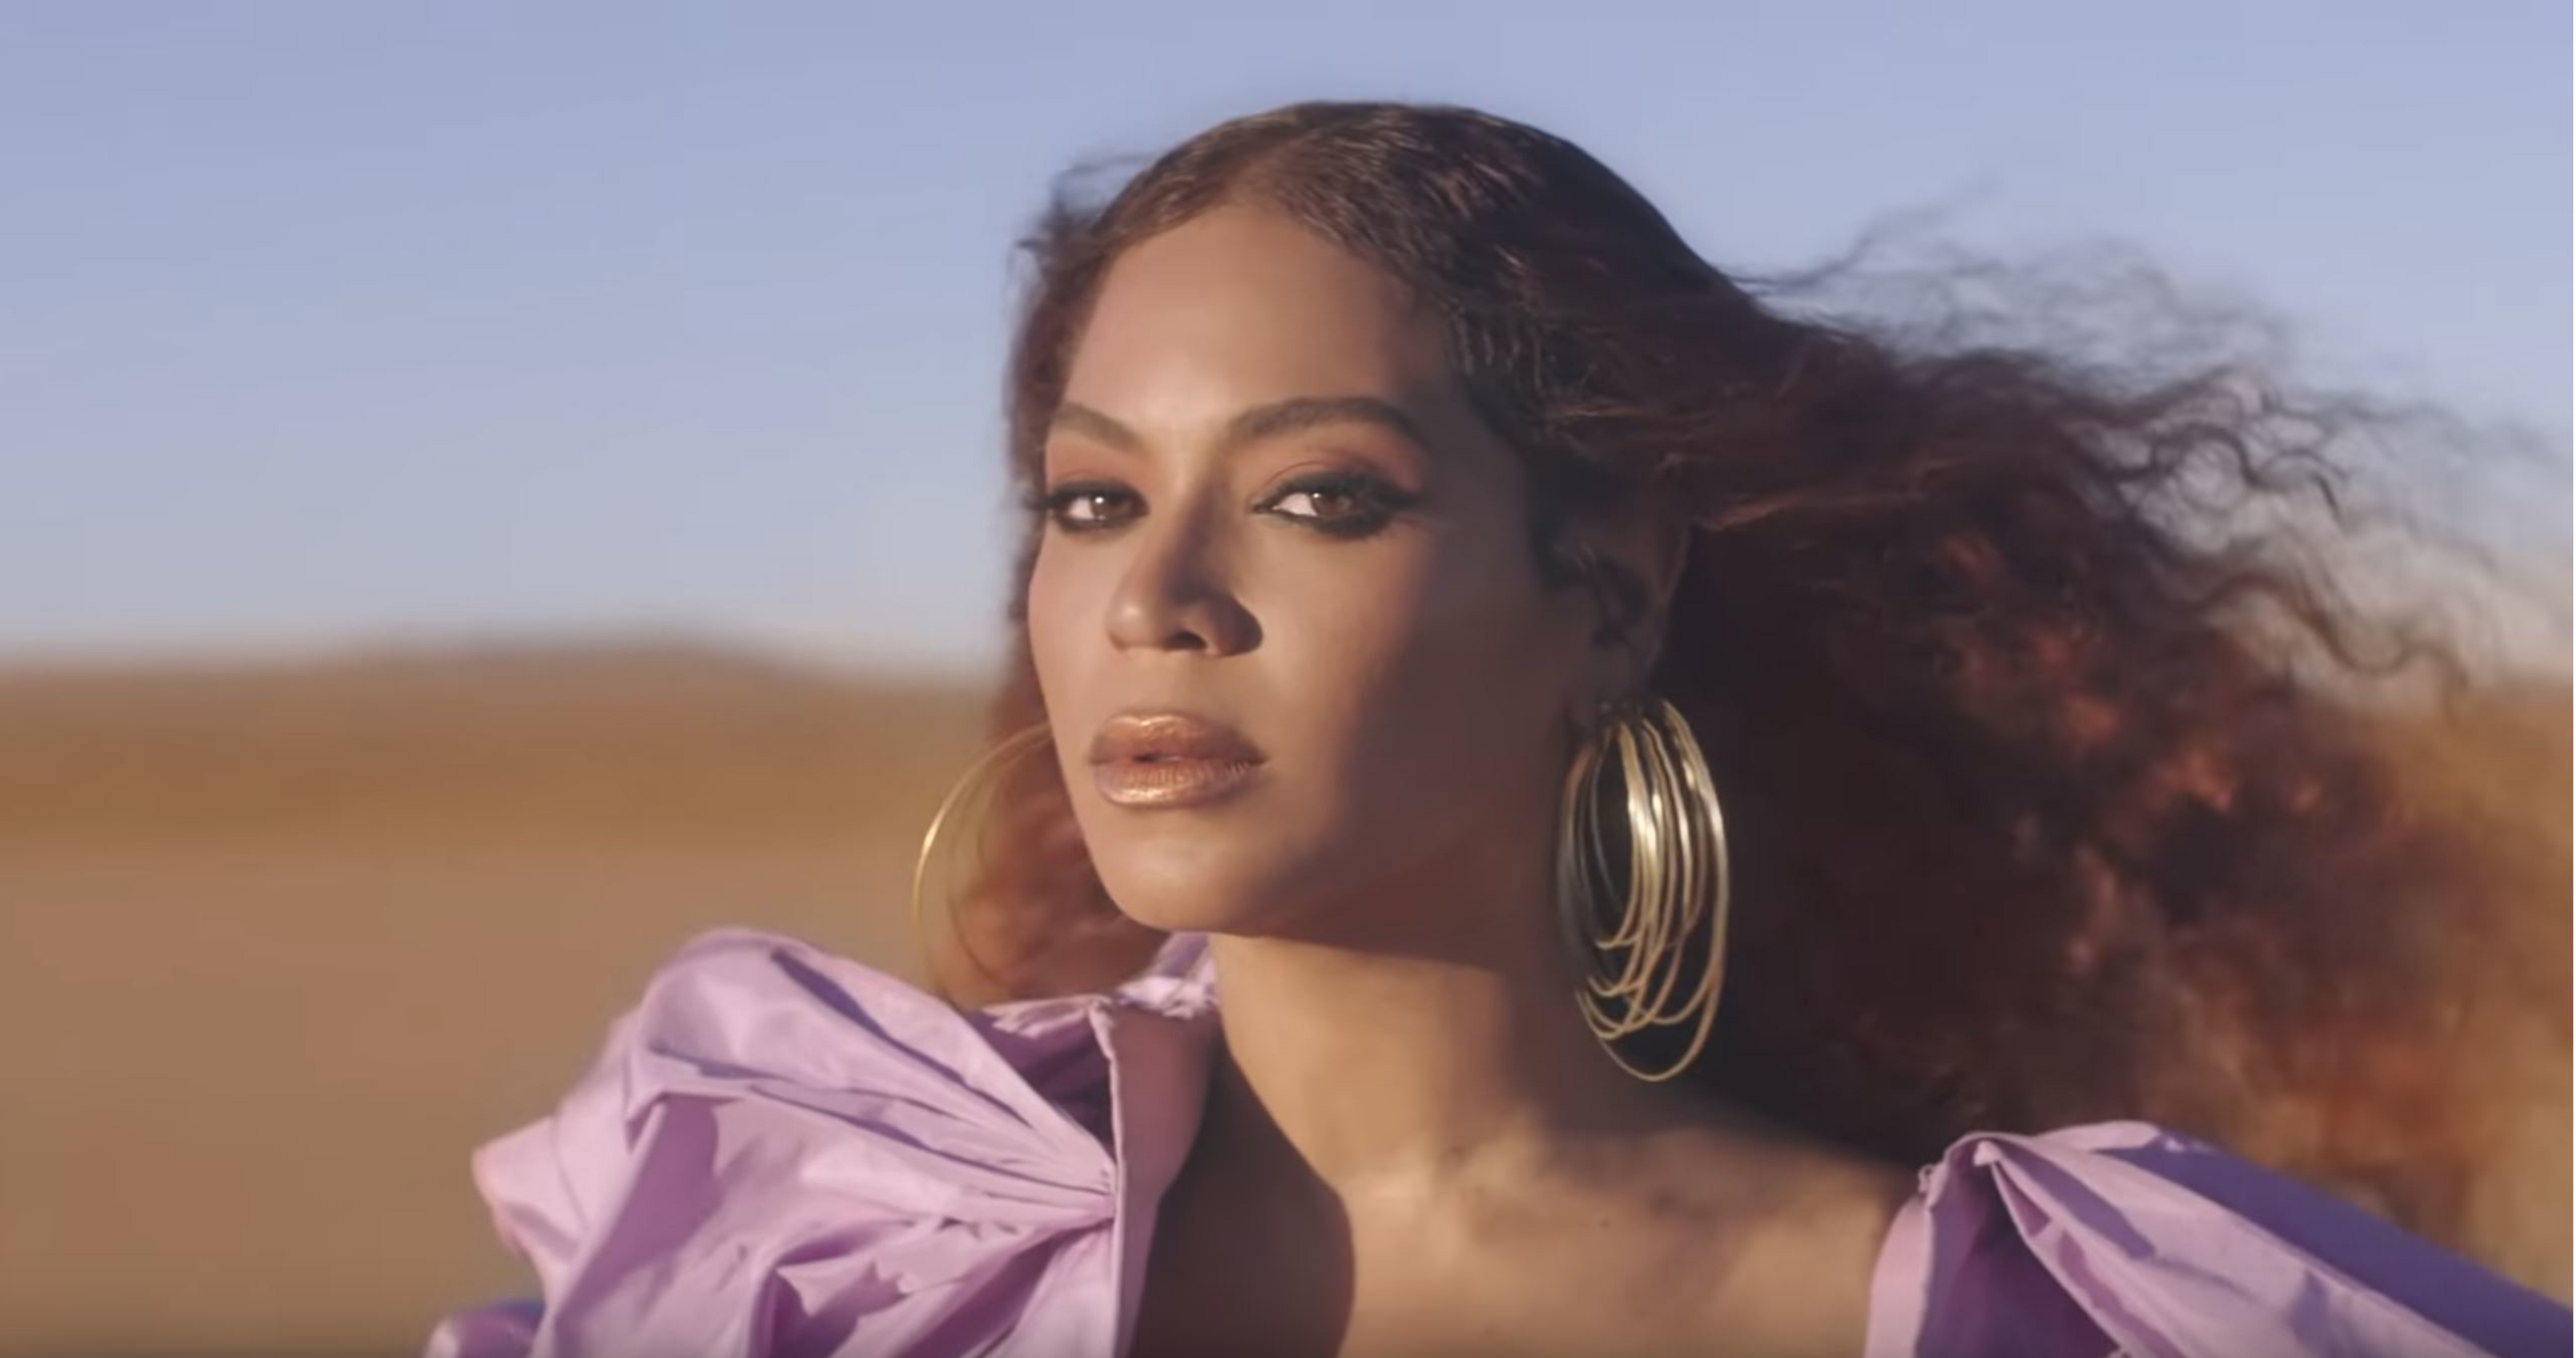 Beyoncé wears lavender and coral off-shoulder, ruffled dress in 'Spirit' music video